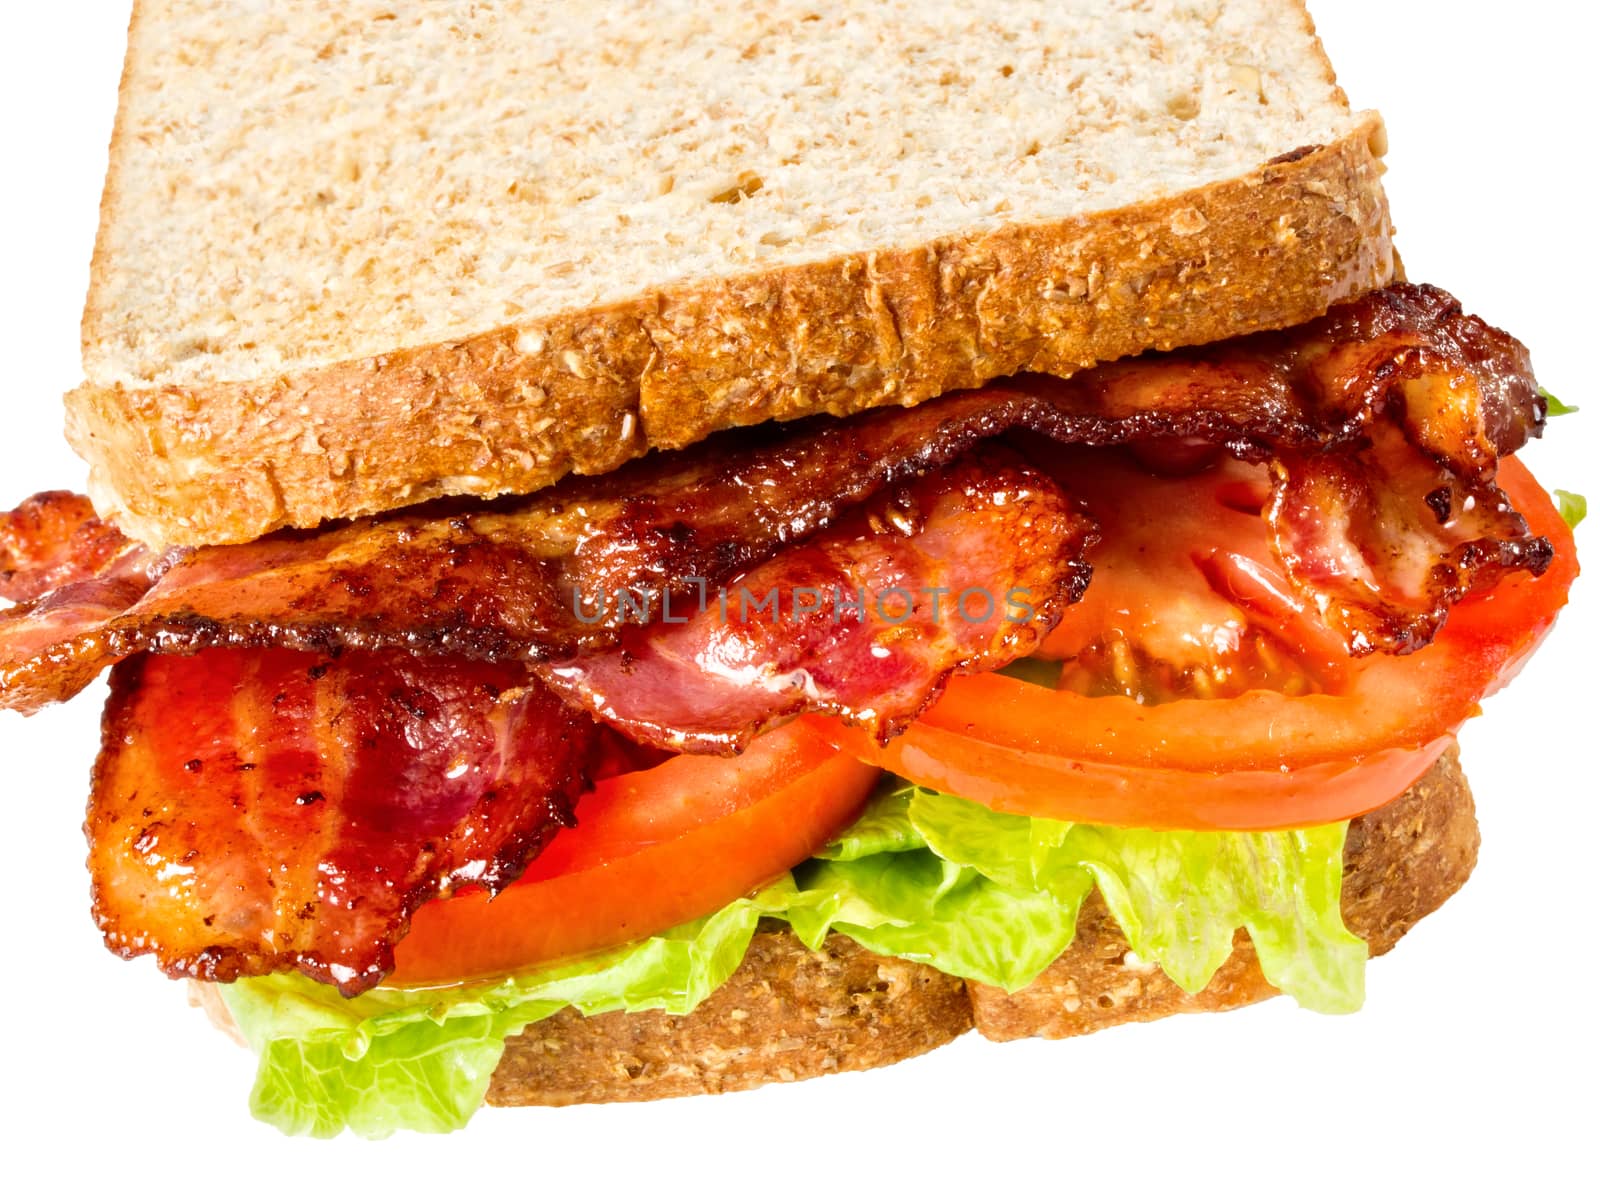 juicy bacon lettuce and tomato sandwich by zkruger